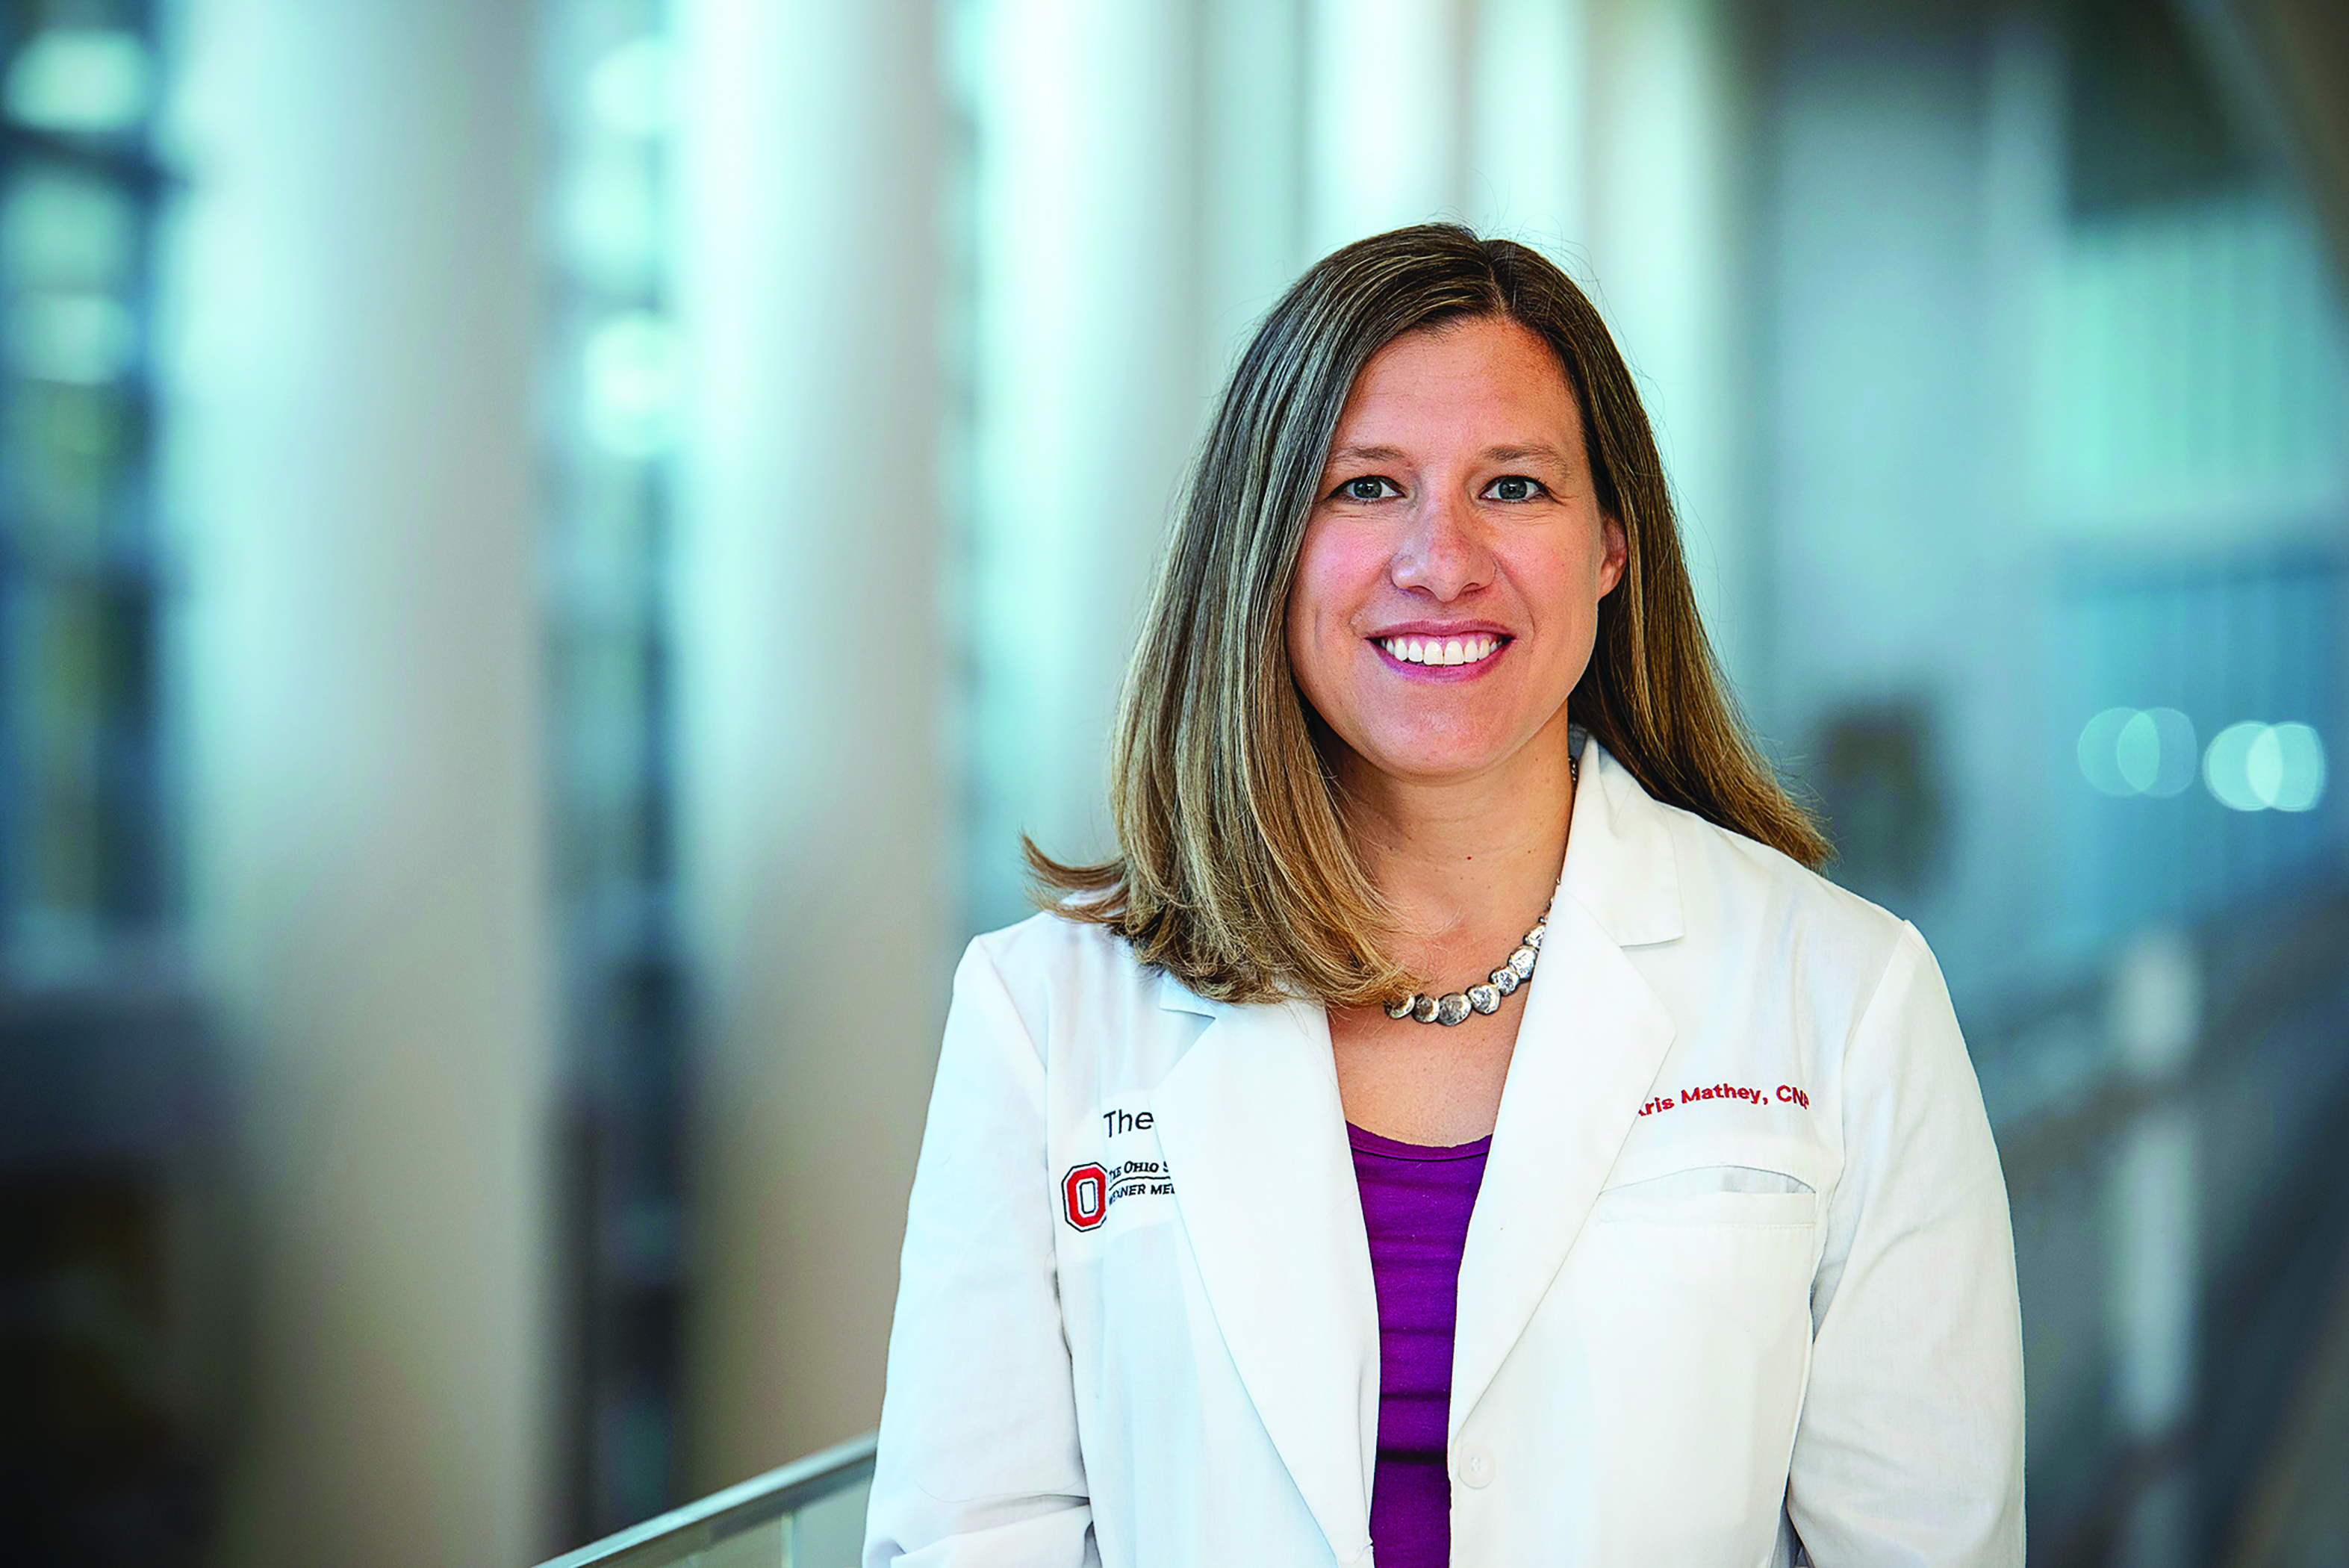 ONS member Kris Mathey, MS, APRN-CNP, AOCNP®, advanced practice provider manager, fellowship director, and gastrointestinal medical oncology nurse practitioner at the James Cancer Hospital and Solove Research Institute at Ohio State University in Columbus